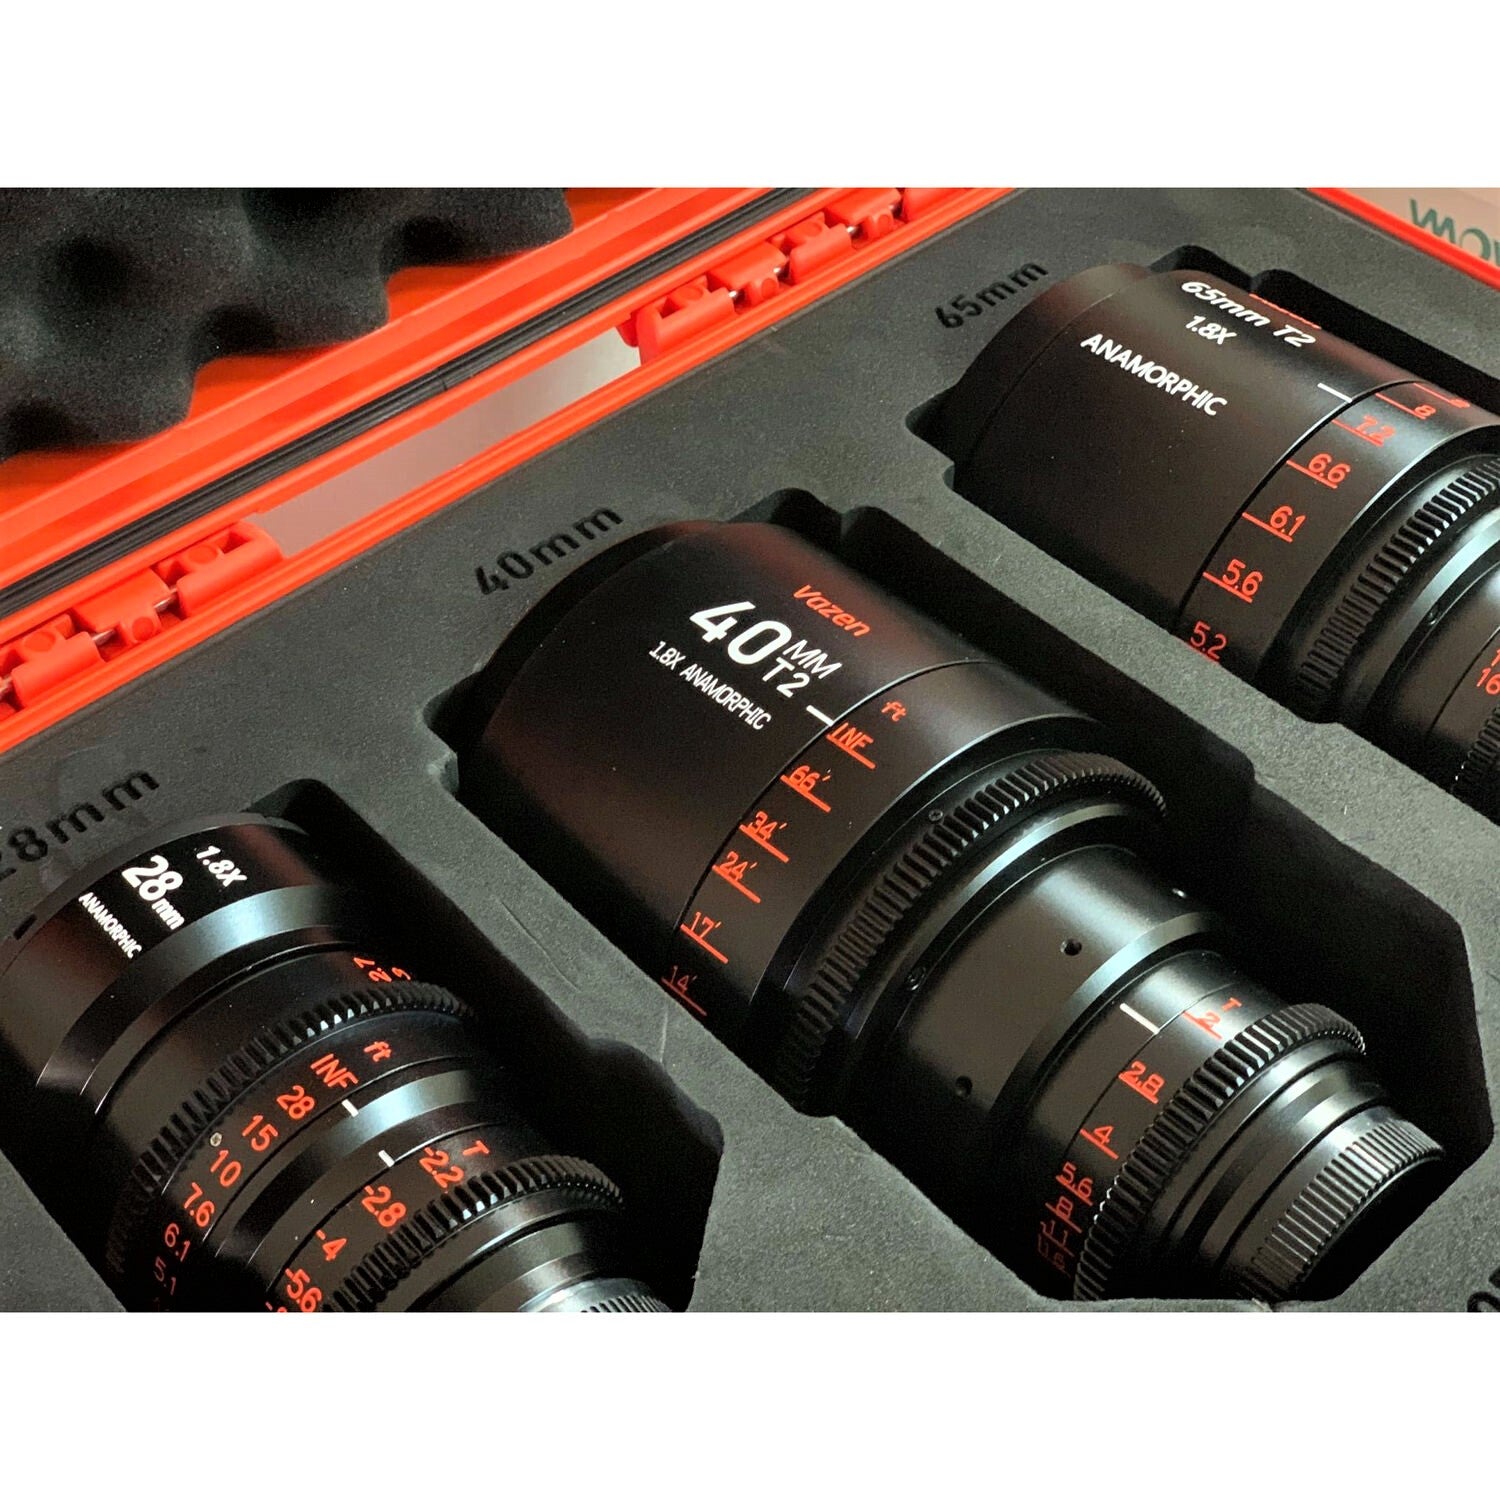 Vazen 28, 40, 65mm 1.8x Anamorphic Lens Bundle for MFT Camera Attached on the Case